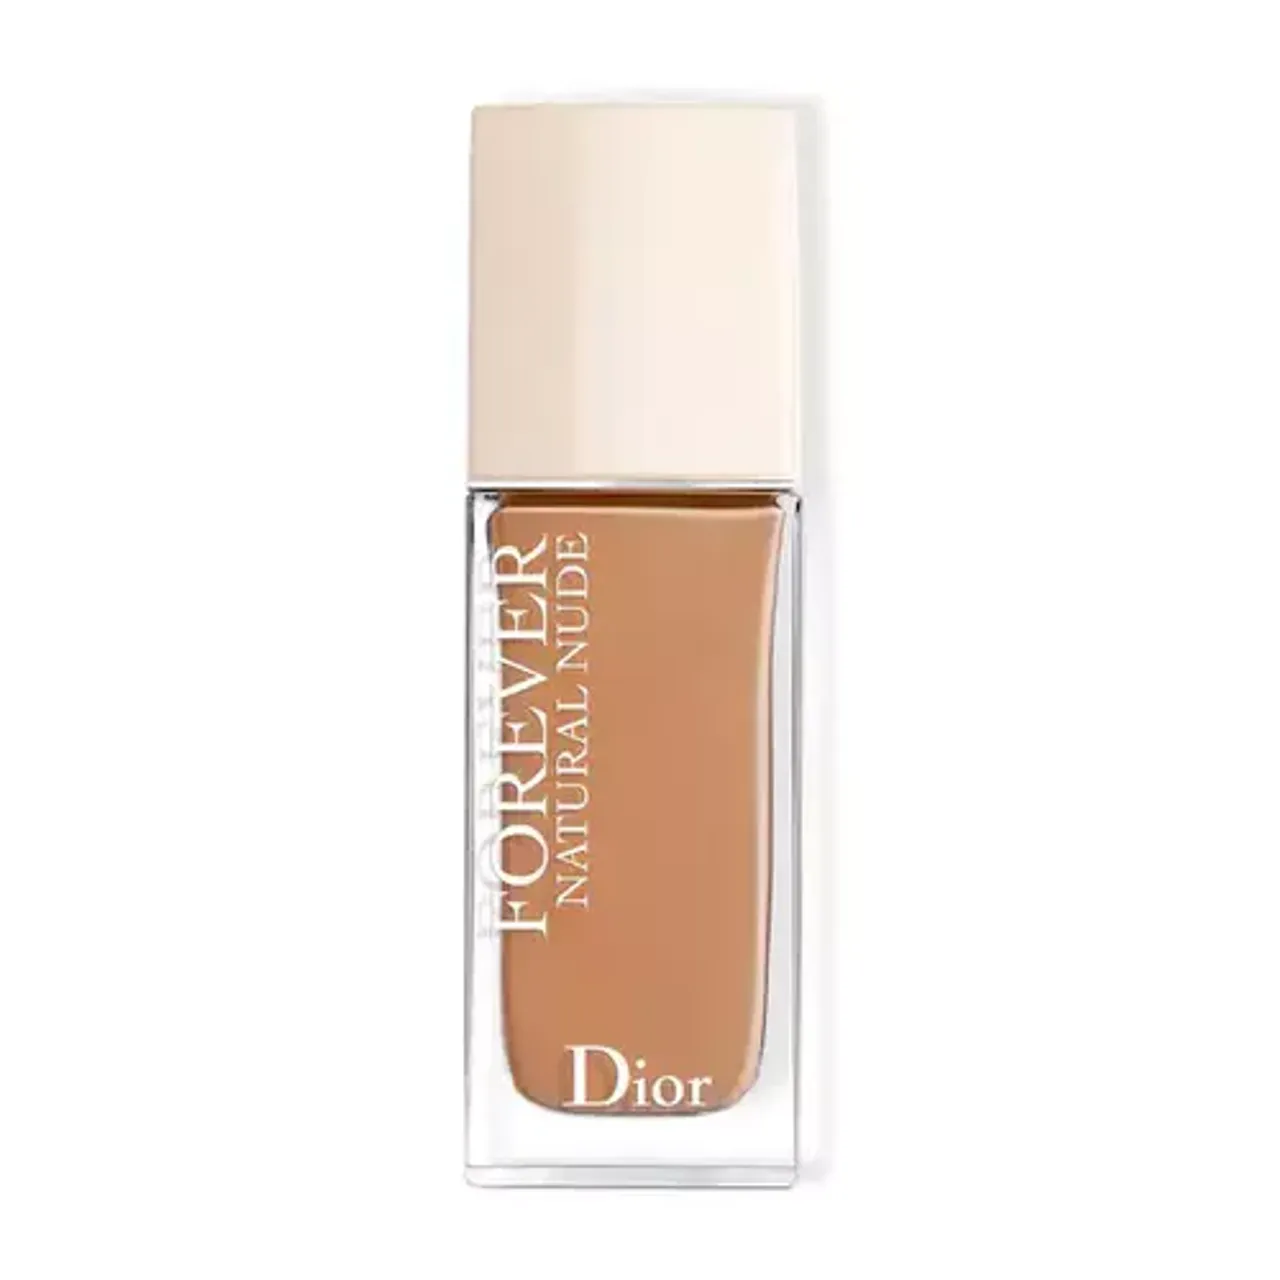 Dior Forever Natural Nude Foundation 4.5N 30 ml